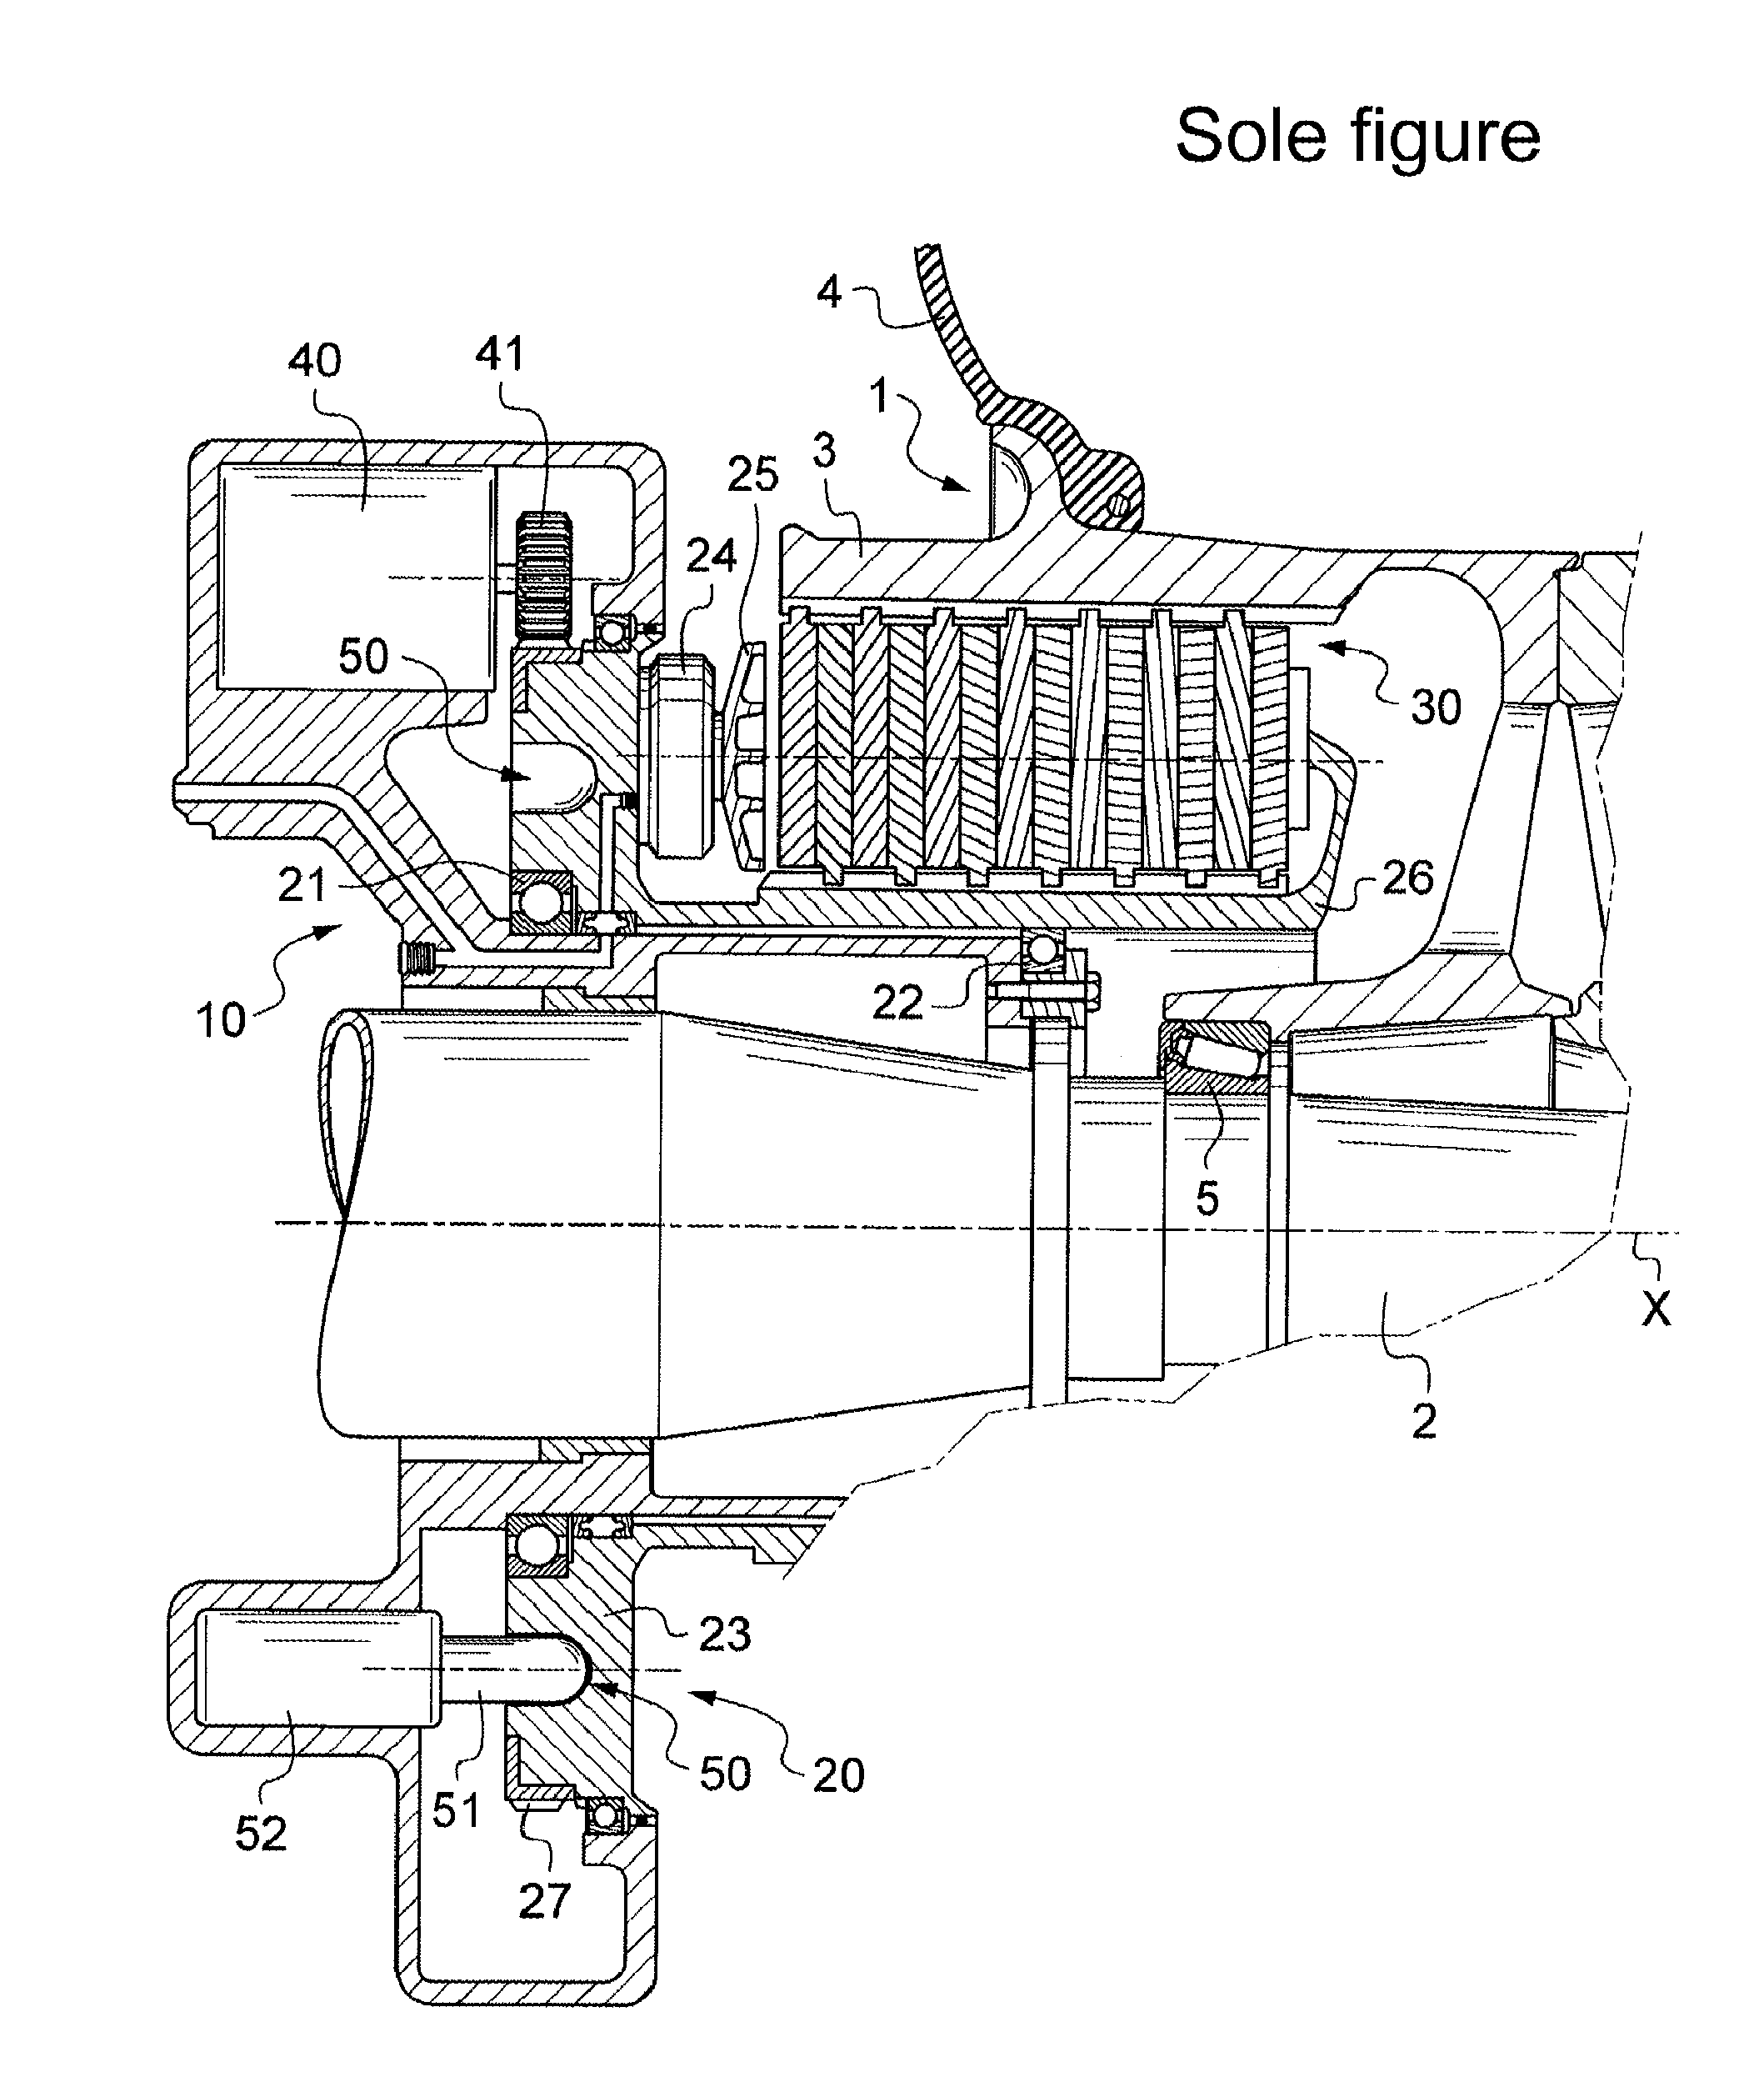 Device for braking and rotating an aircraft wheel